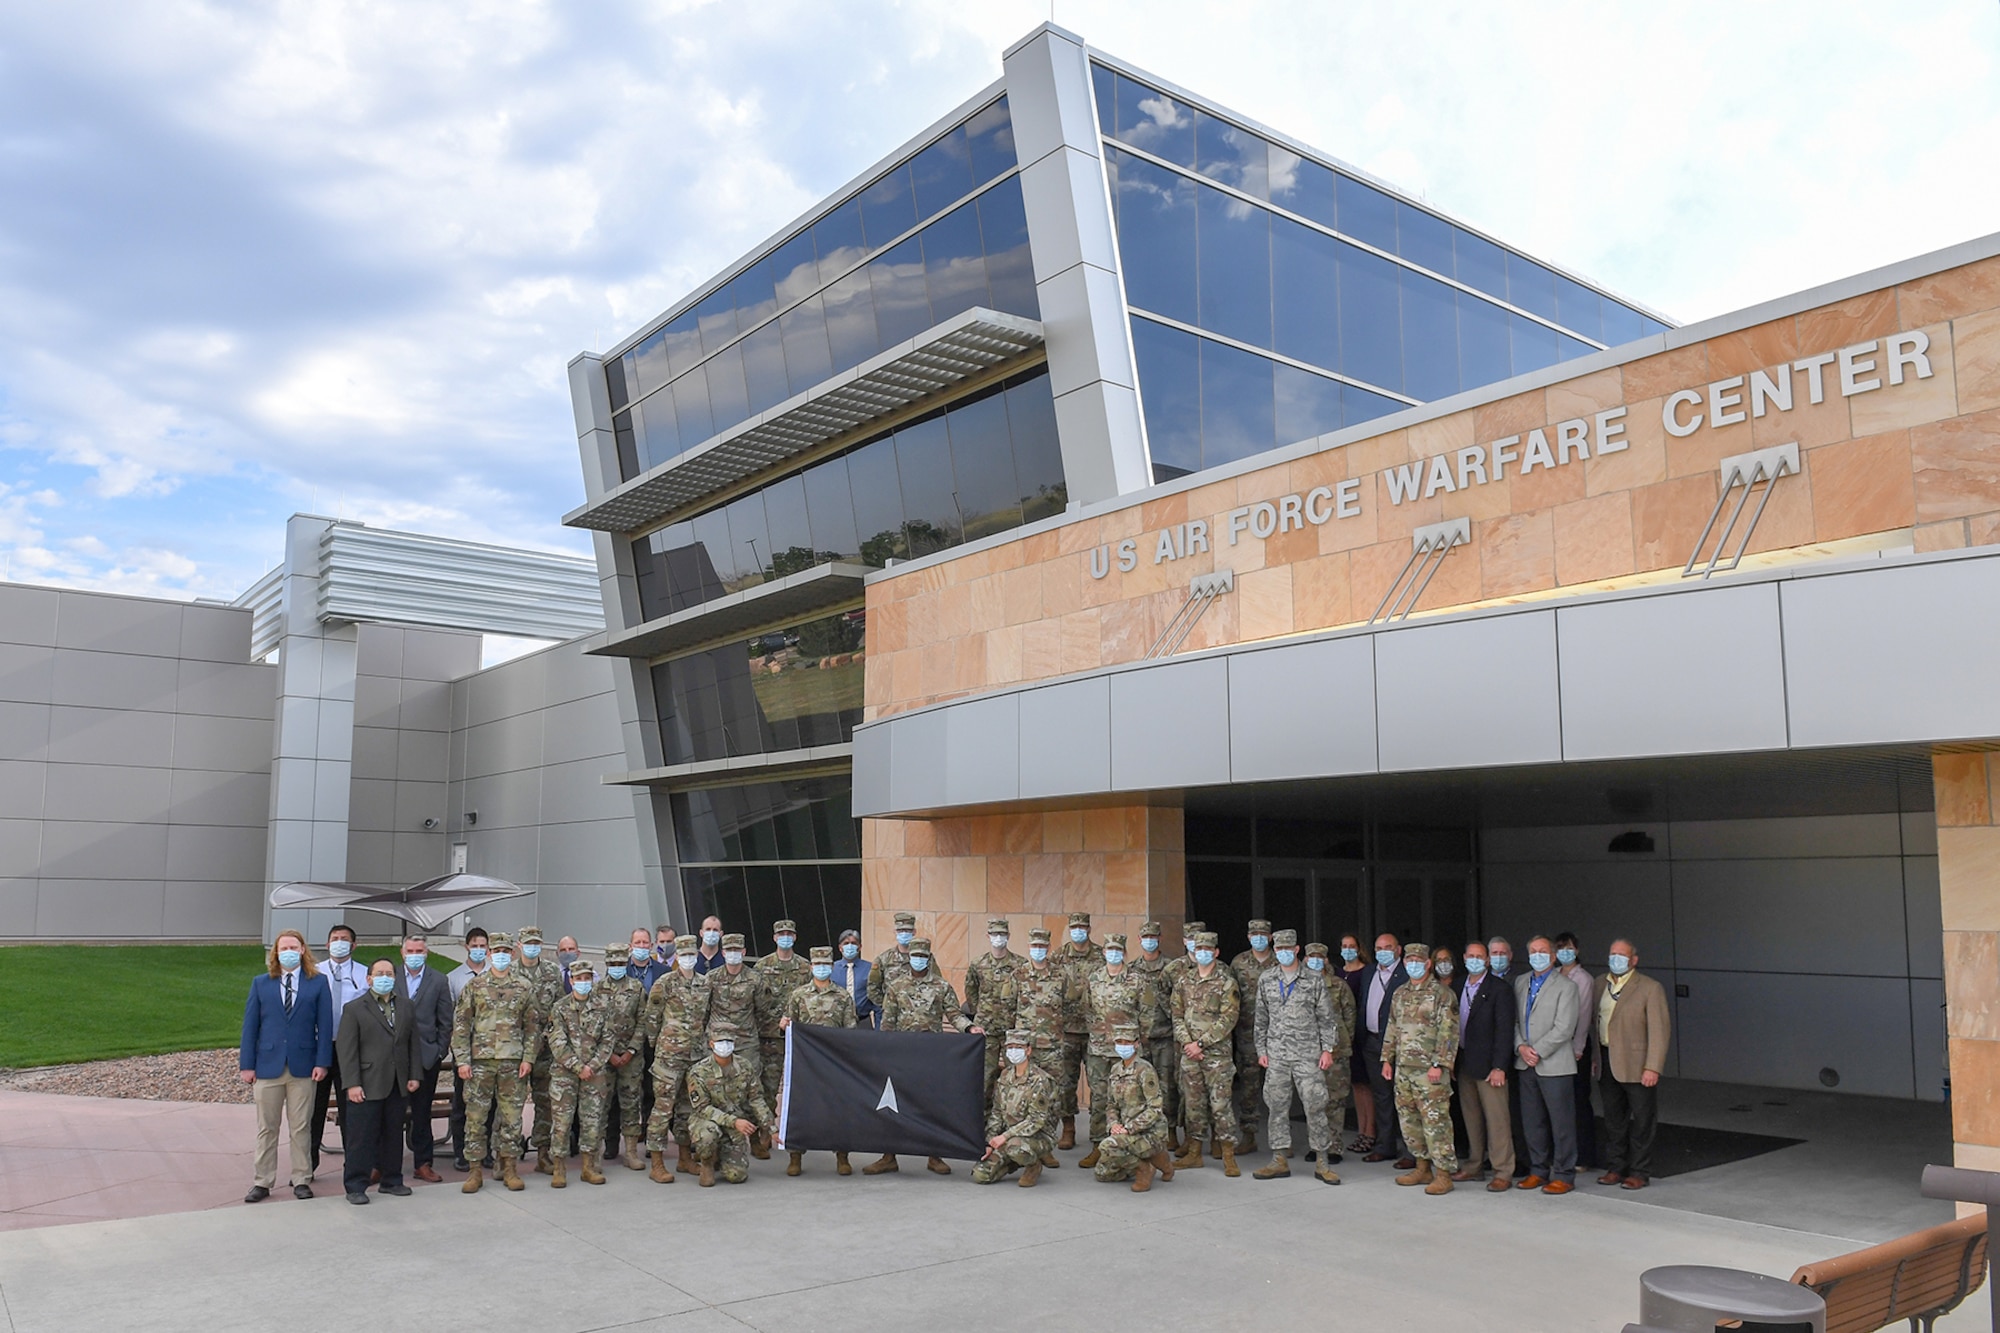 Space Flag 20-3 participants stand in front of the U.S. Air Force Warfare Center at Schriever Air Force Base, Colorado. This was the first Space Flag exercise completed as part of the new Space Training and Readiness